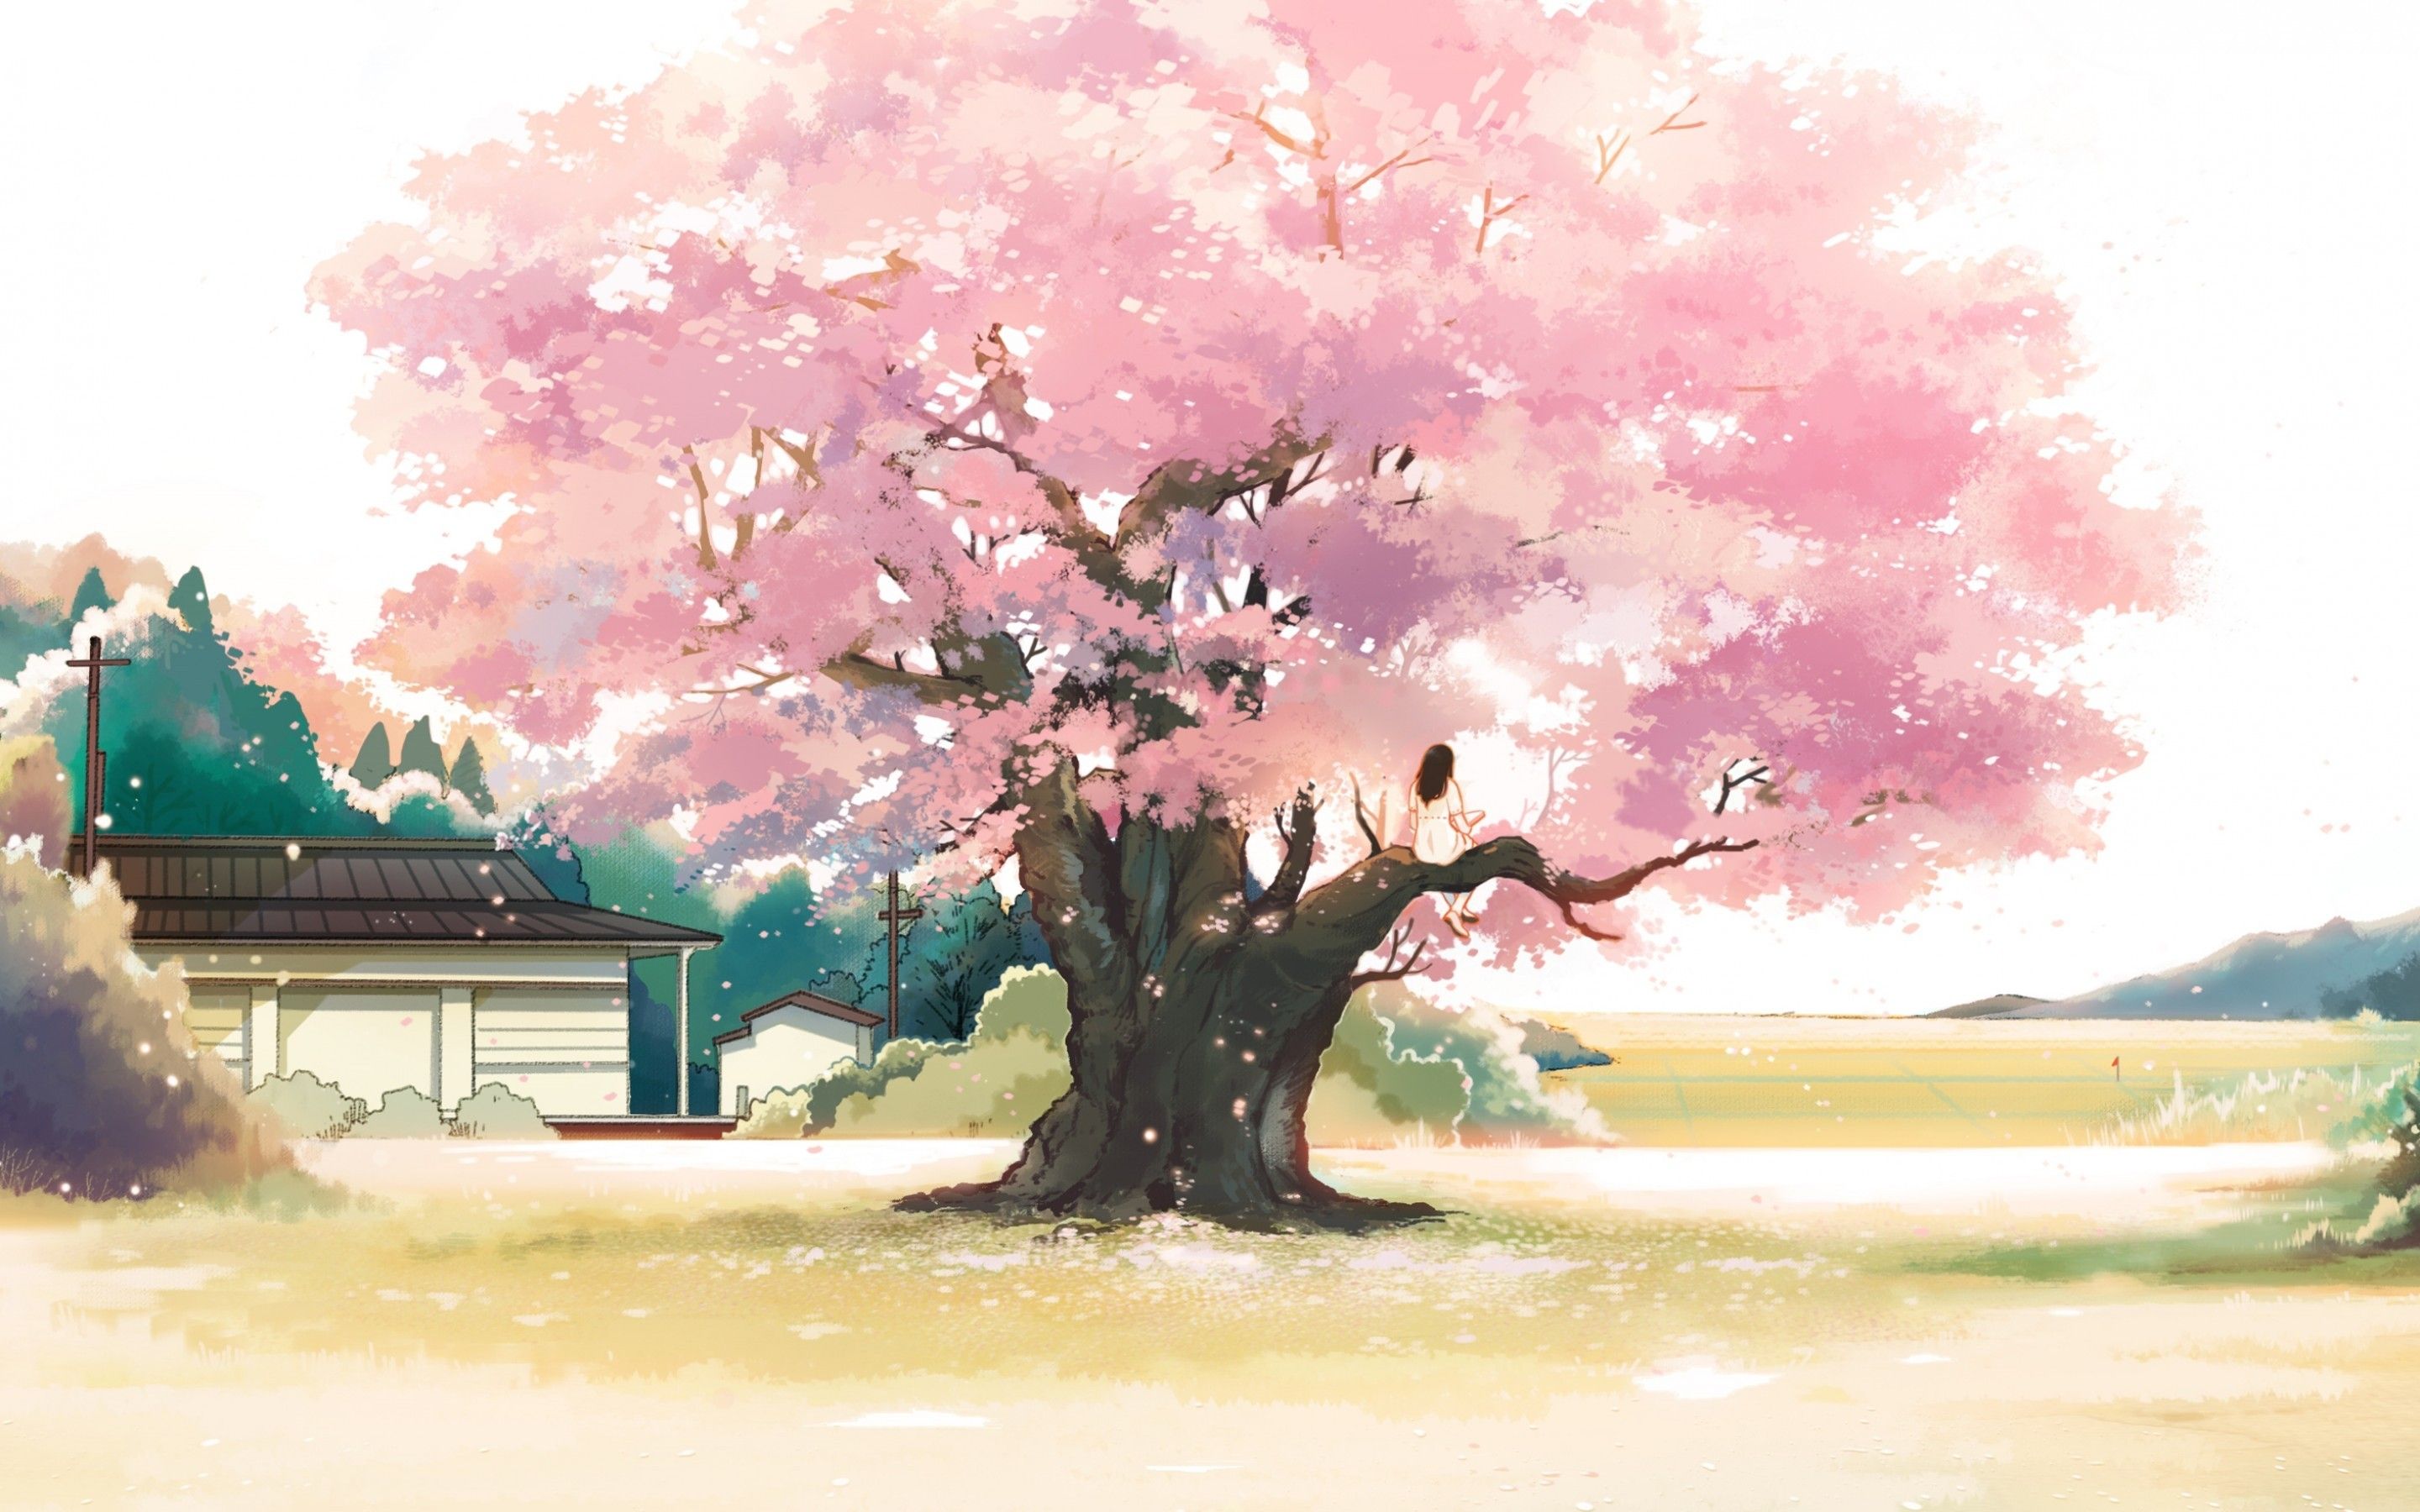 Download 2880x1800 Anime Landscape, Girl, Cherry Blossom, Pink